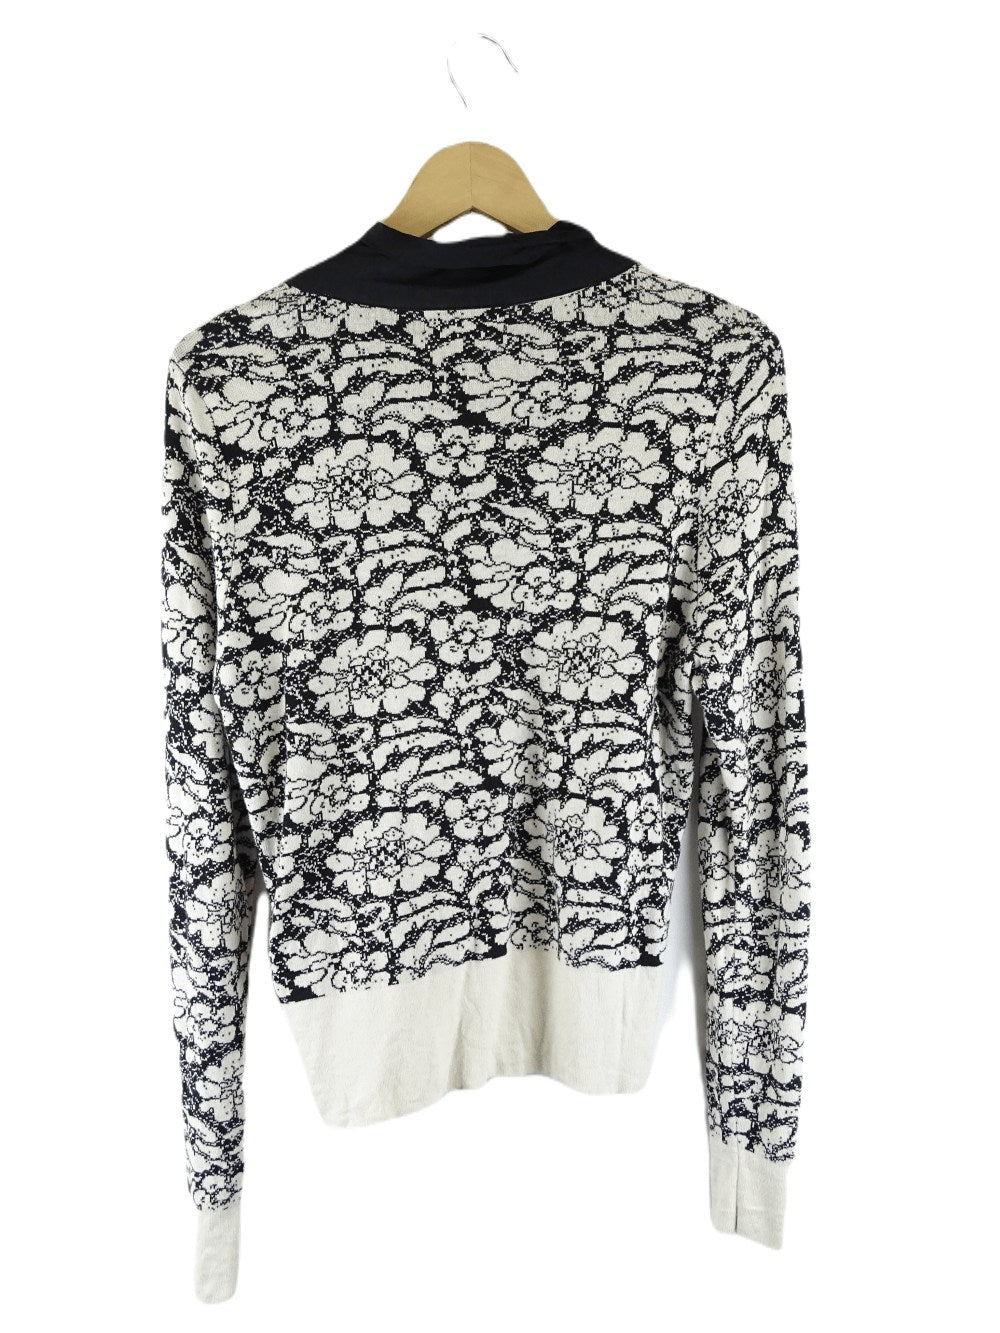 Alannah Hill Black And White Cardigan 16